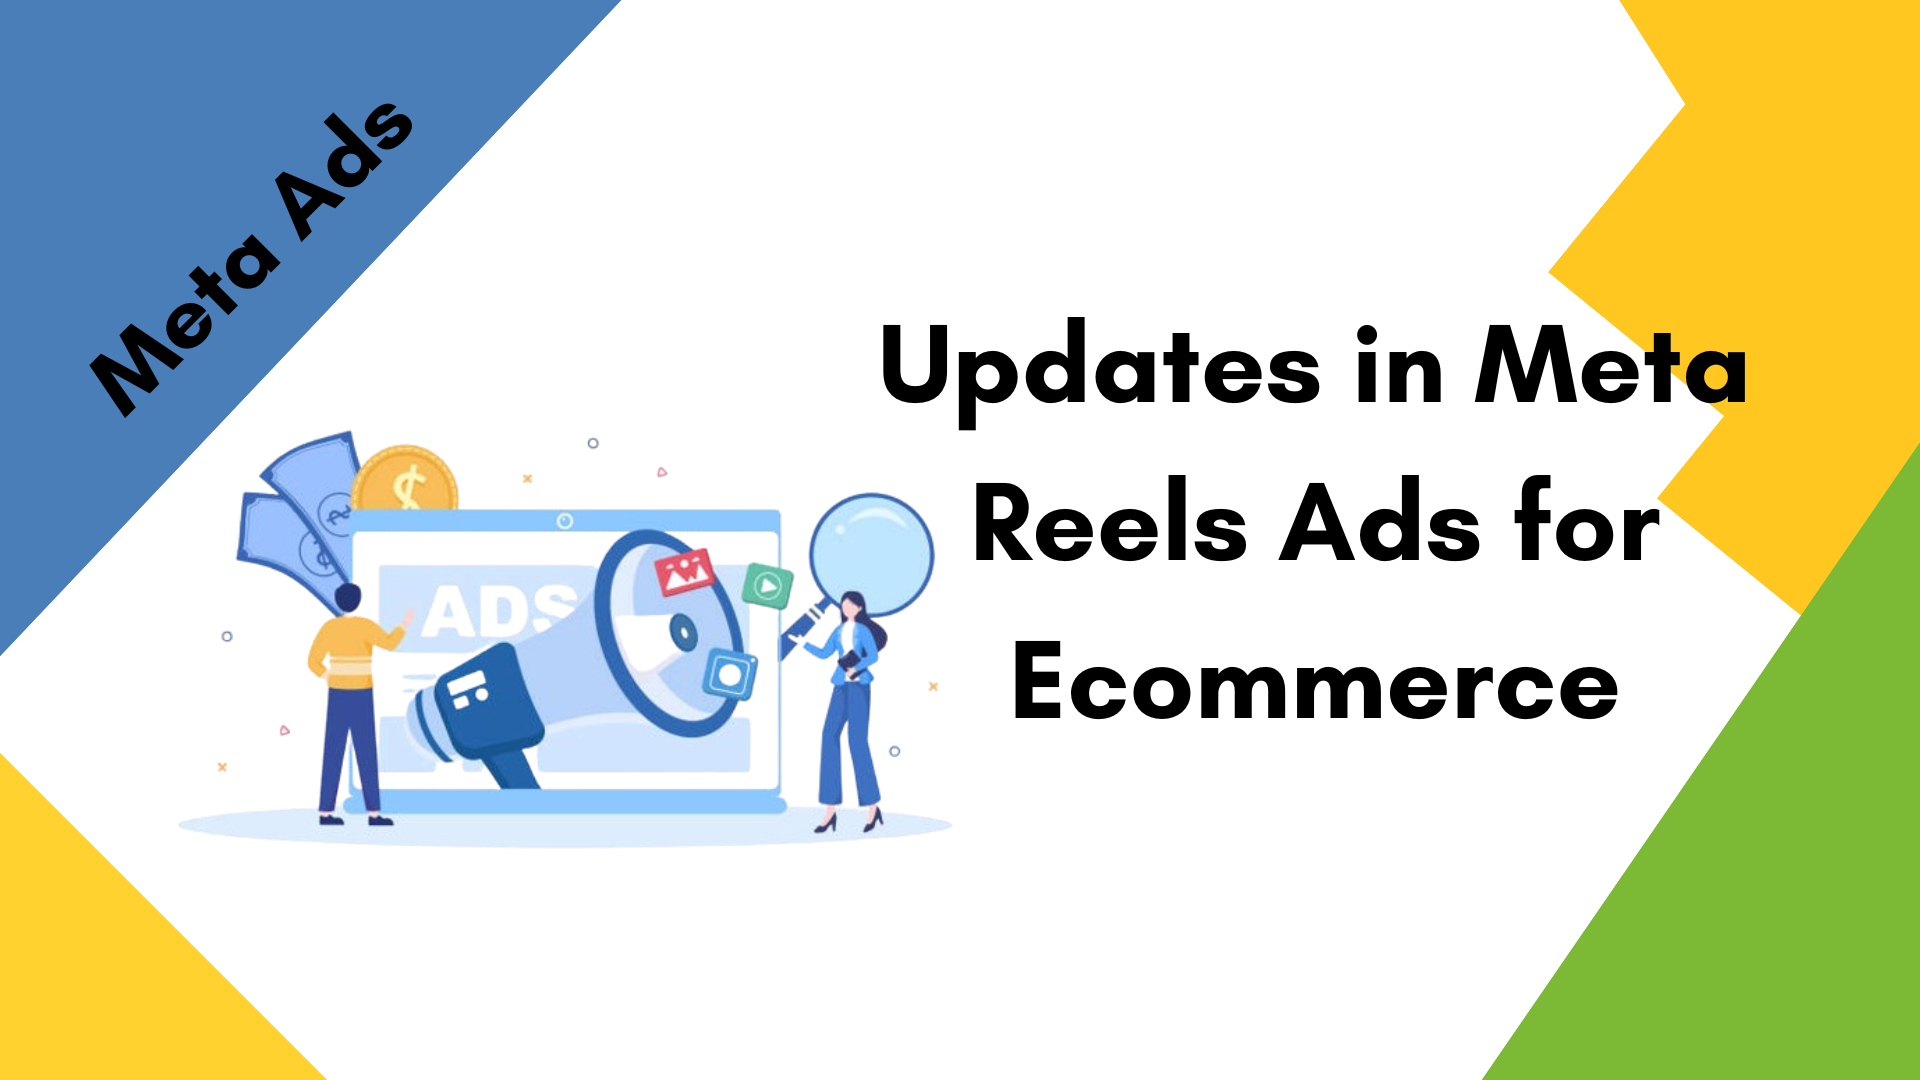 An Analysis of Recent Updates in Meta Reels Ads for Ecommerce